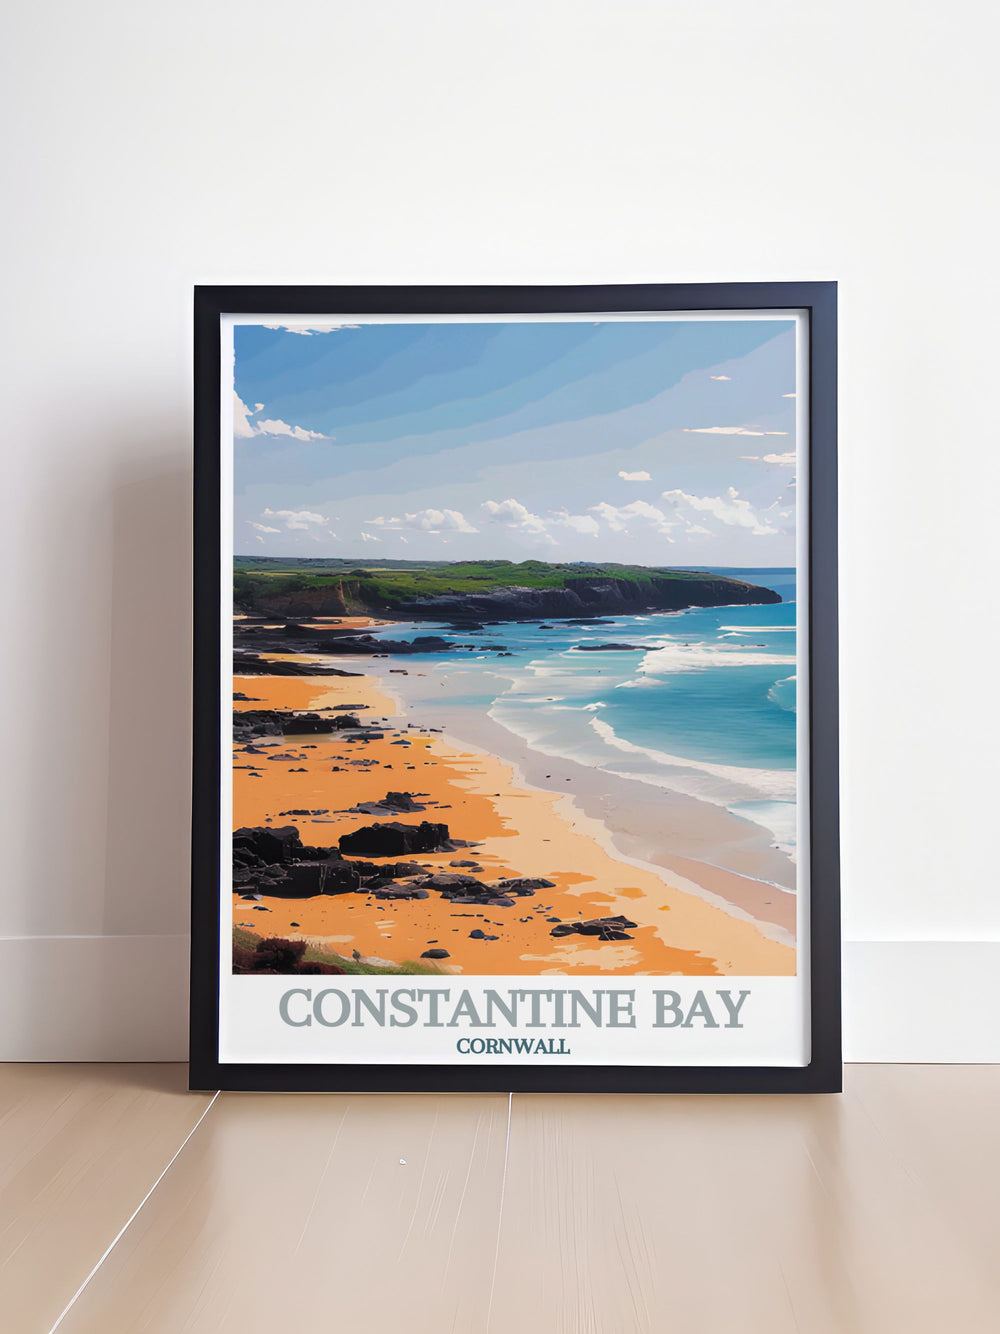 Capture the essence of Cornwall with our detailed art prints, showcasing the stunning coastal scenery of Constantine Bay and Boobys Bay. These prints highlight the dramatic cliffs, rolling dunes, and tranquil beaches that make Cornwall a must visit.